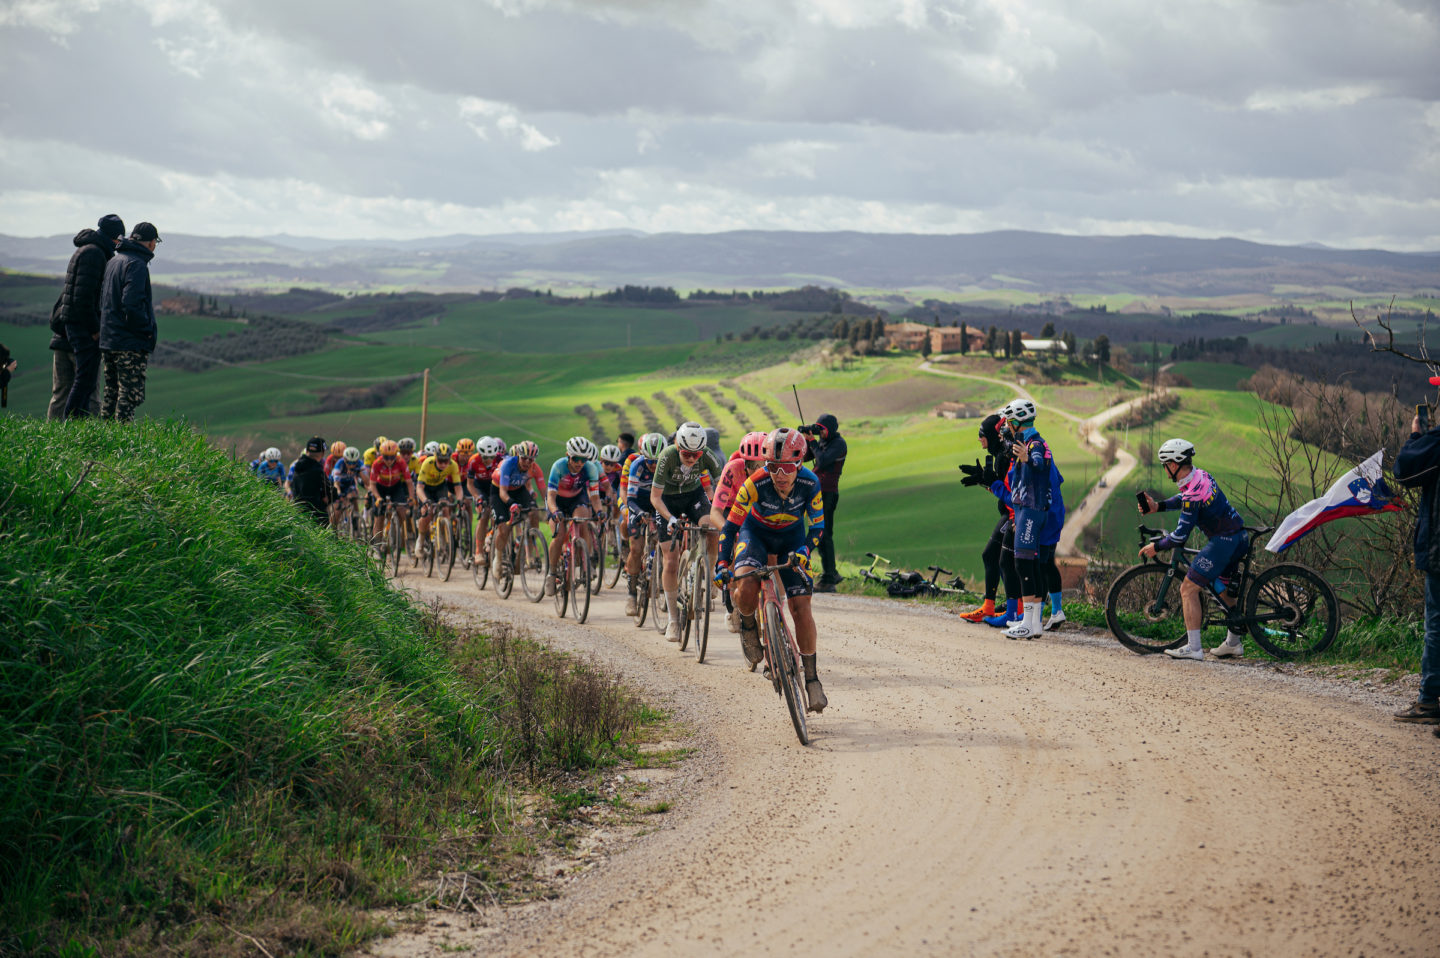 PHOTO GALLERY – An epic day on the white roads